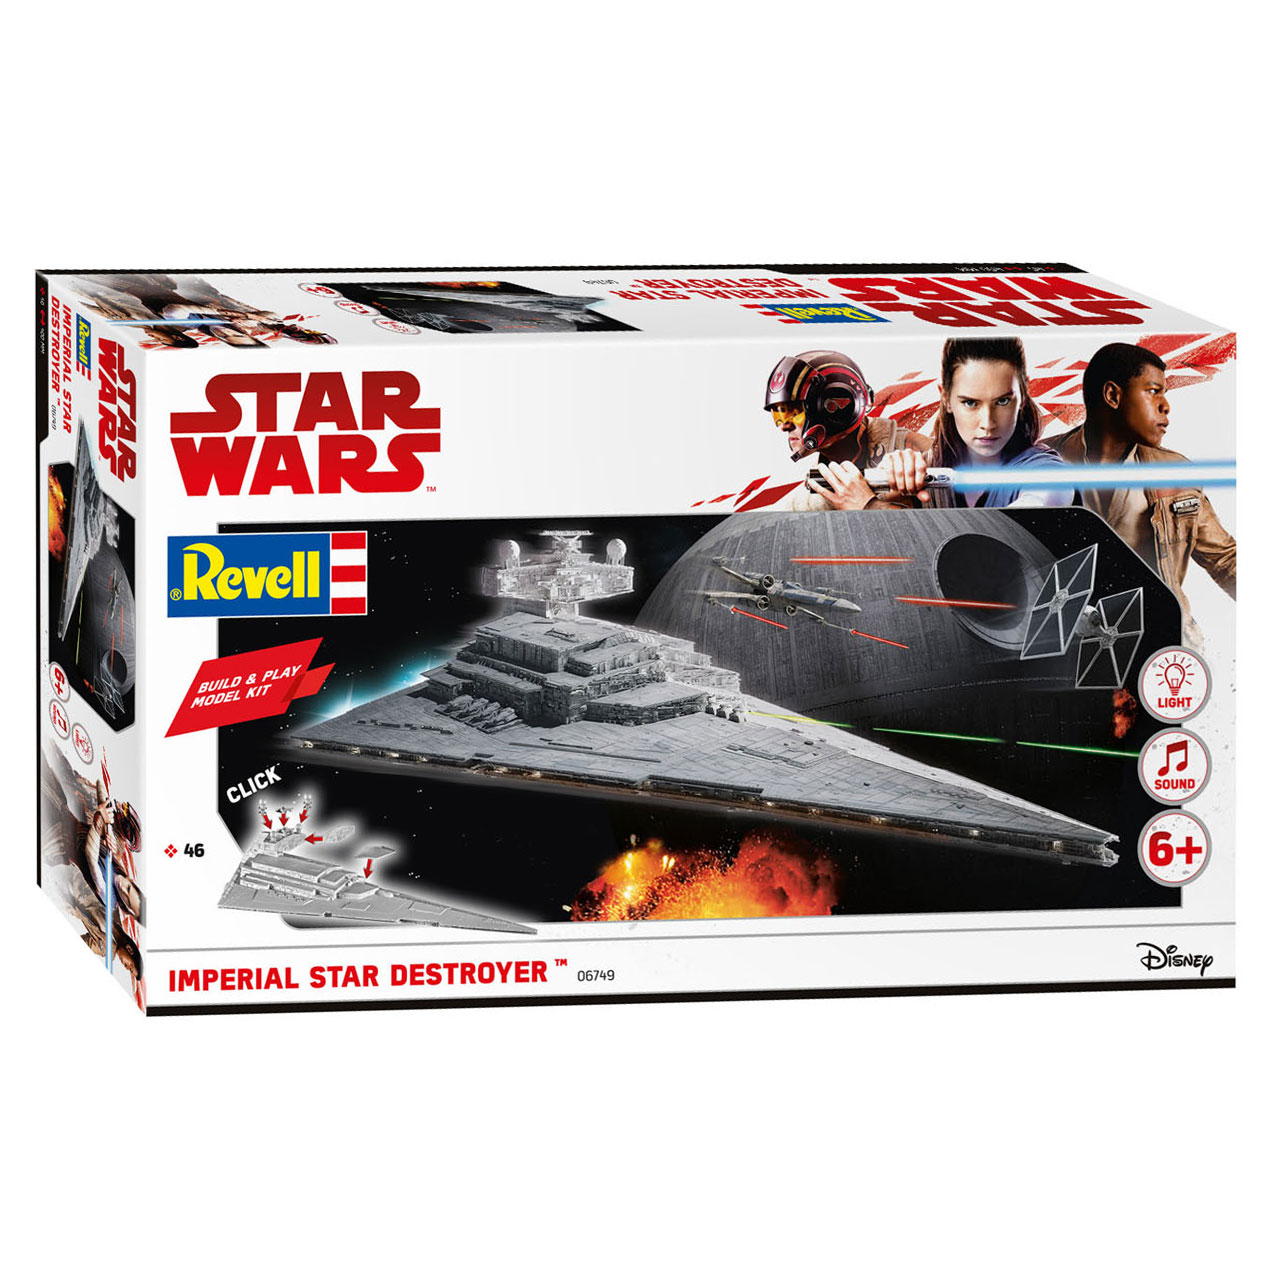 Revell Build & Play Imperial Star Destroyer | Thimble Toys